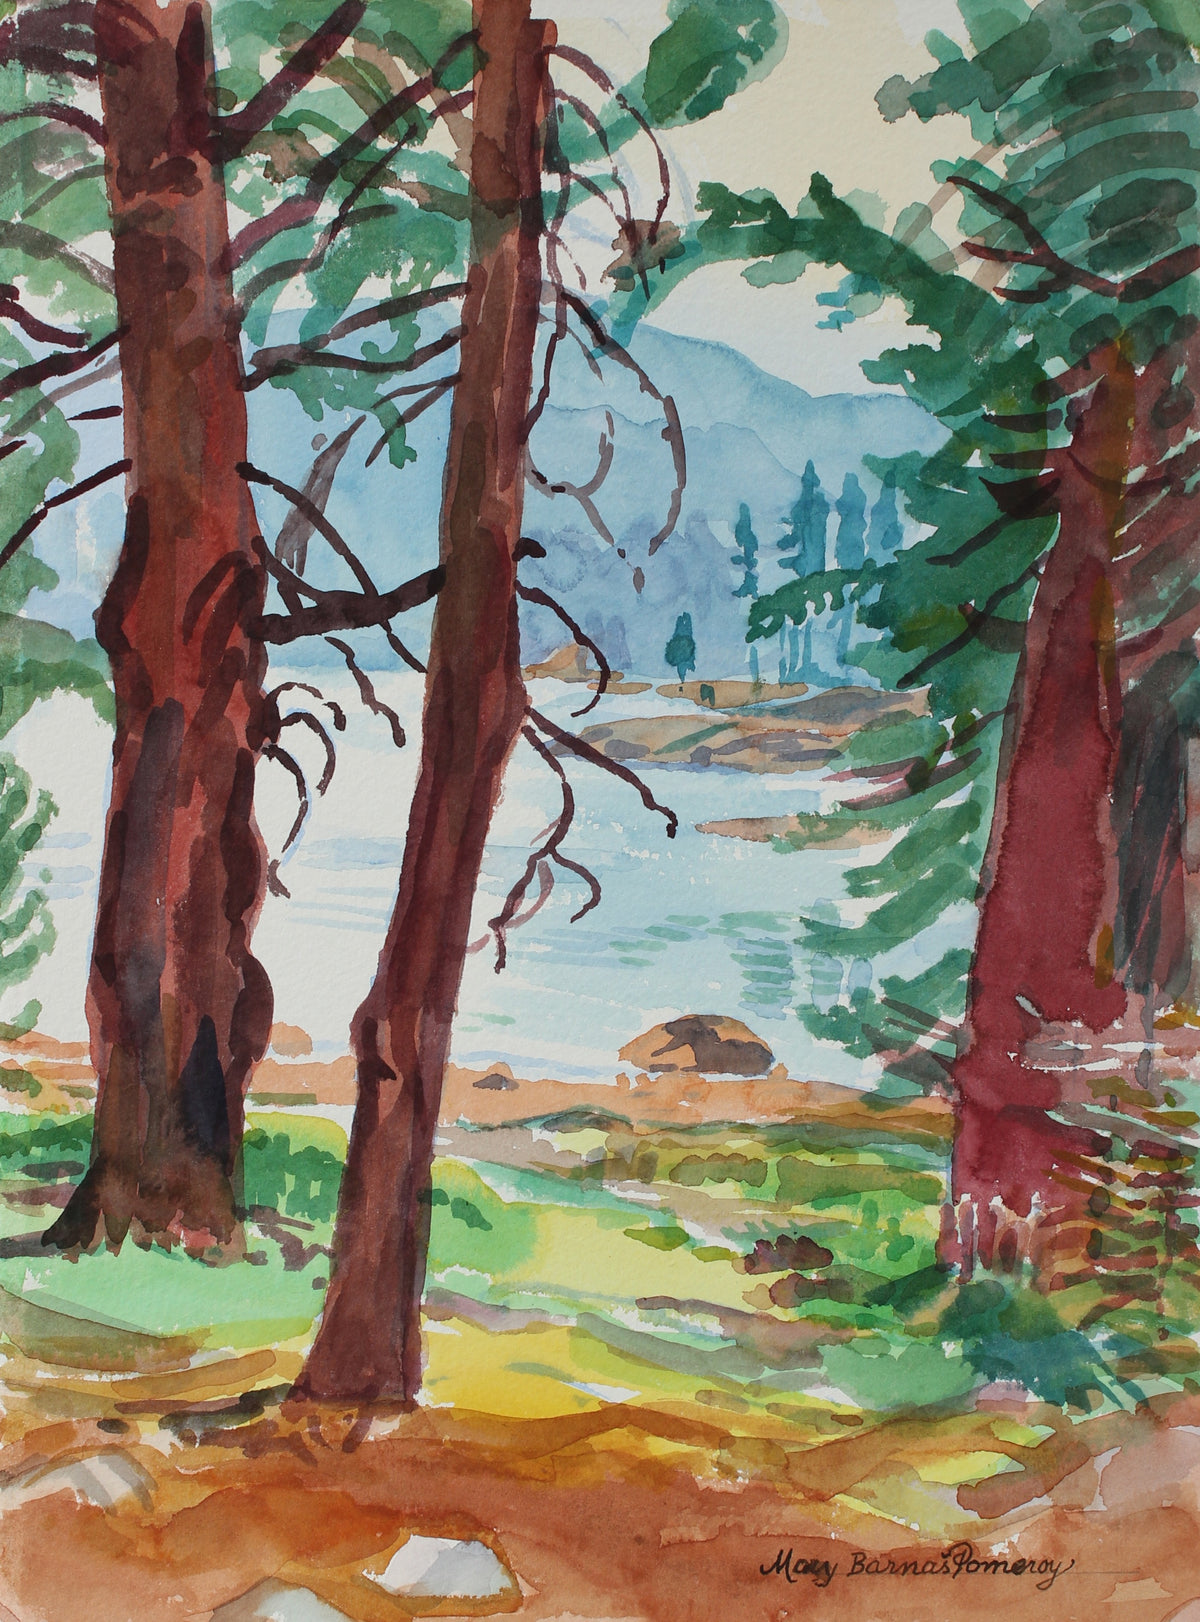 &lt;i&gt;Silver Lake From Shady Woods&lt;/i&gt;&lt;br&gt;August 2001 Watercolor&lt;br&gt;&lt;br&gt;#95109